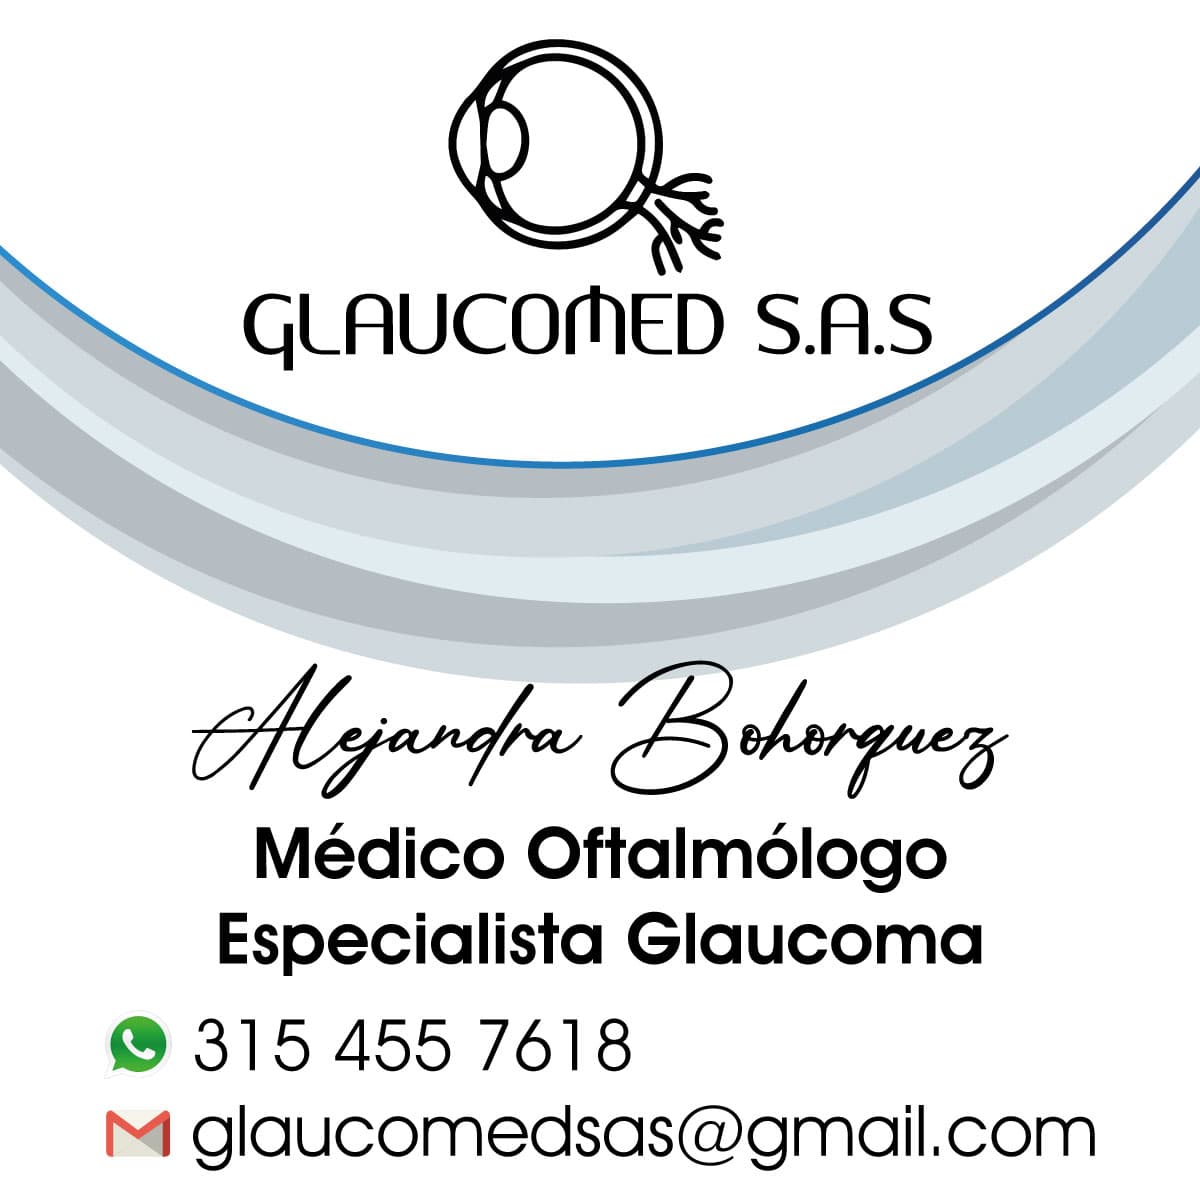 Glaucomed S.A.S